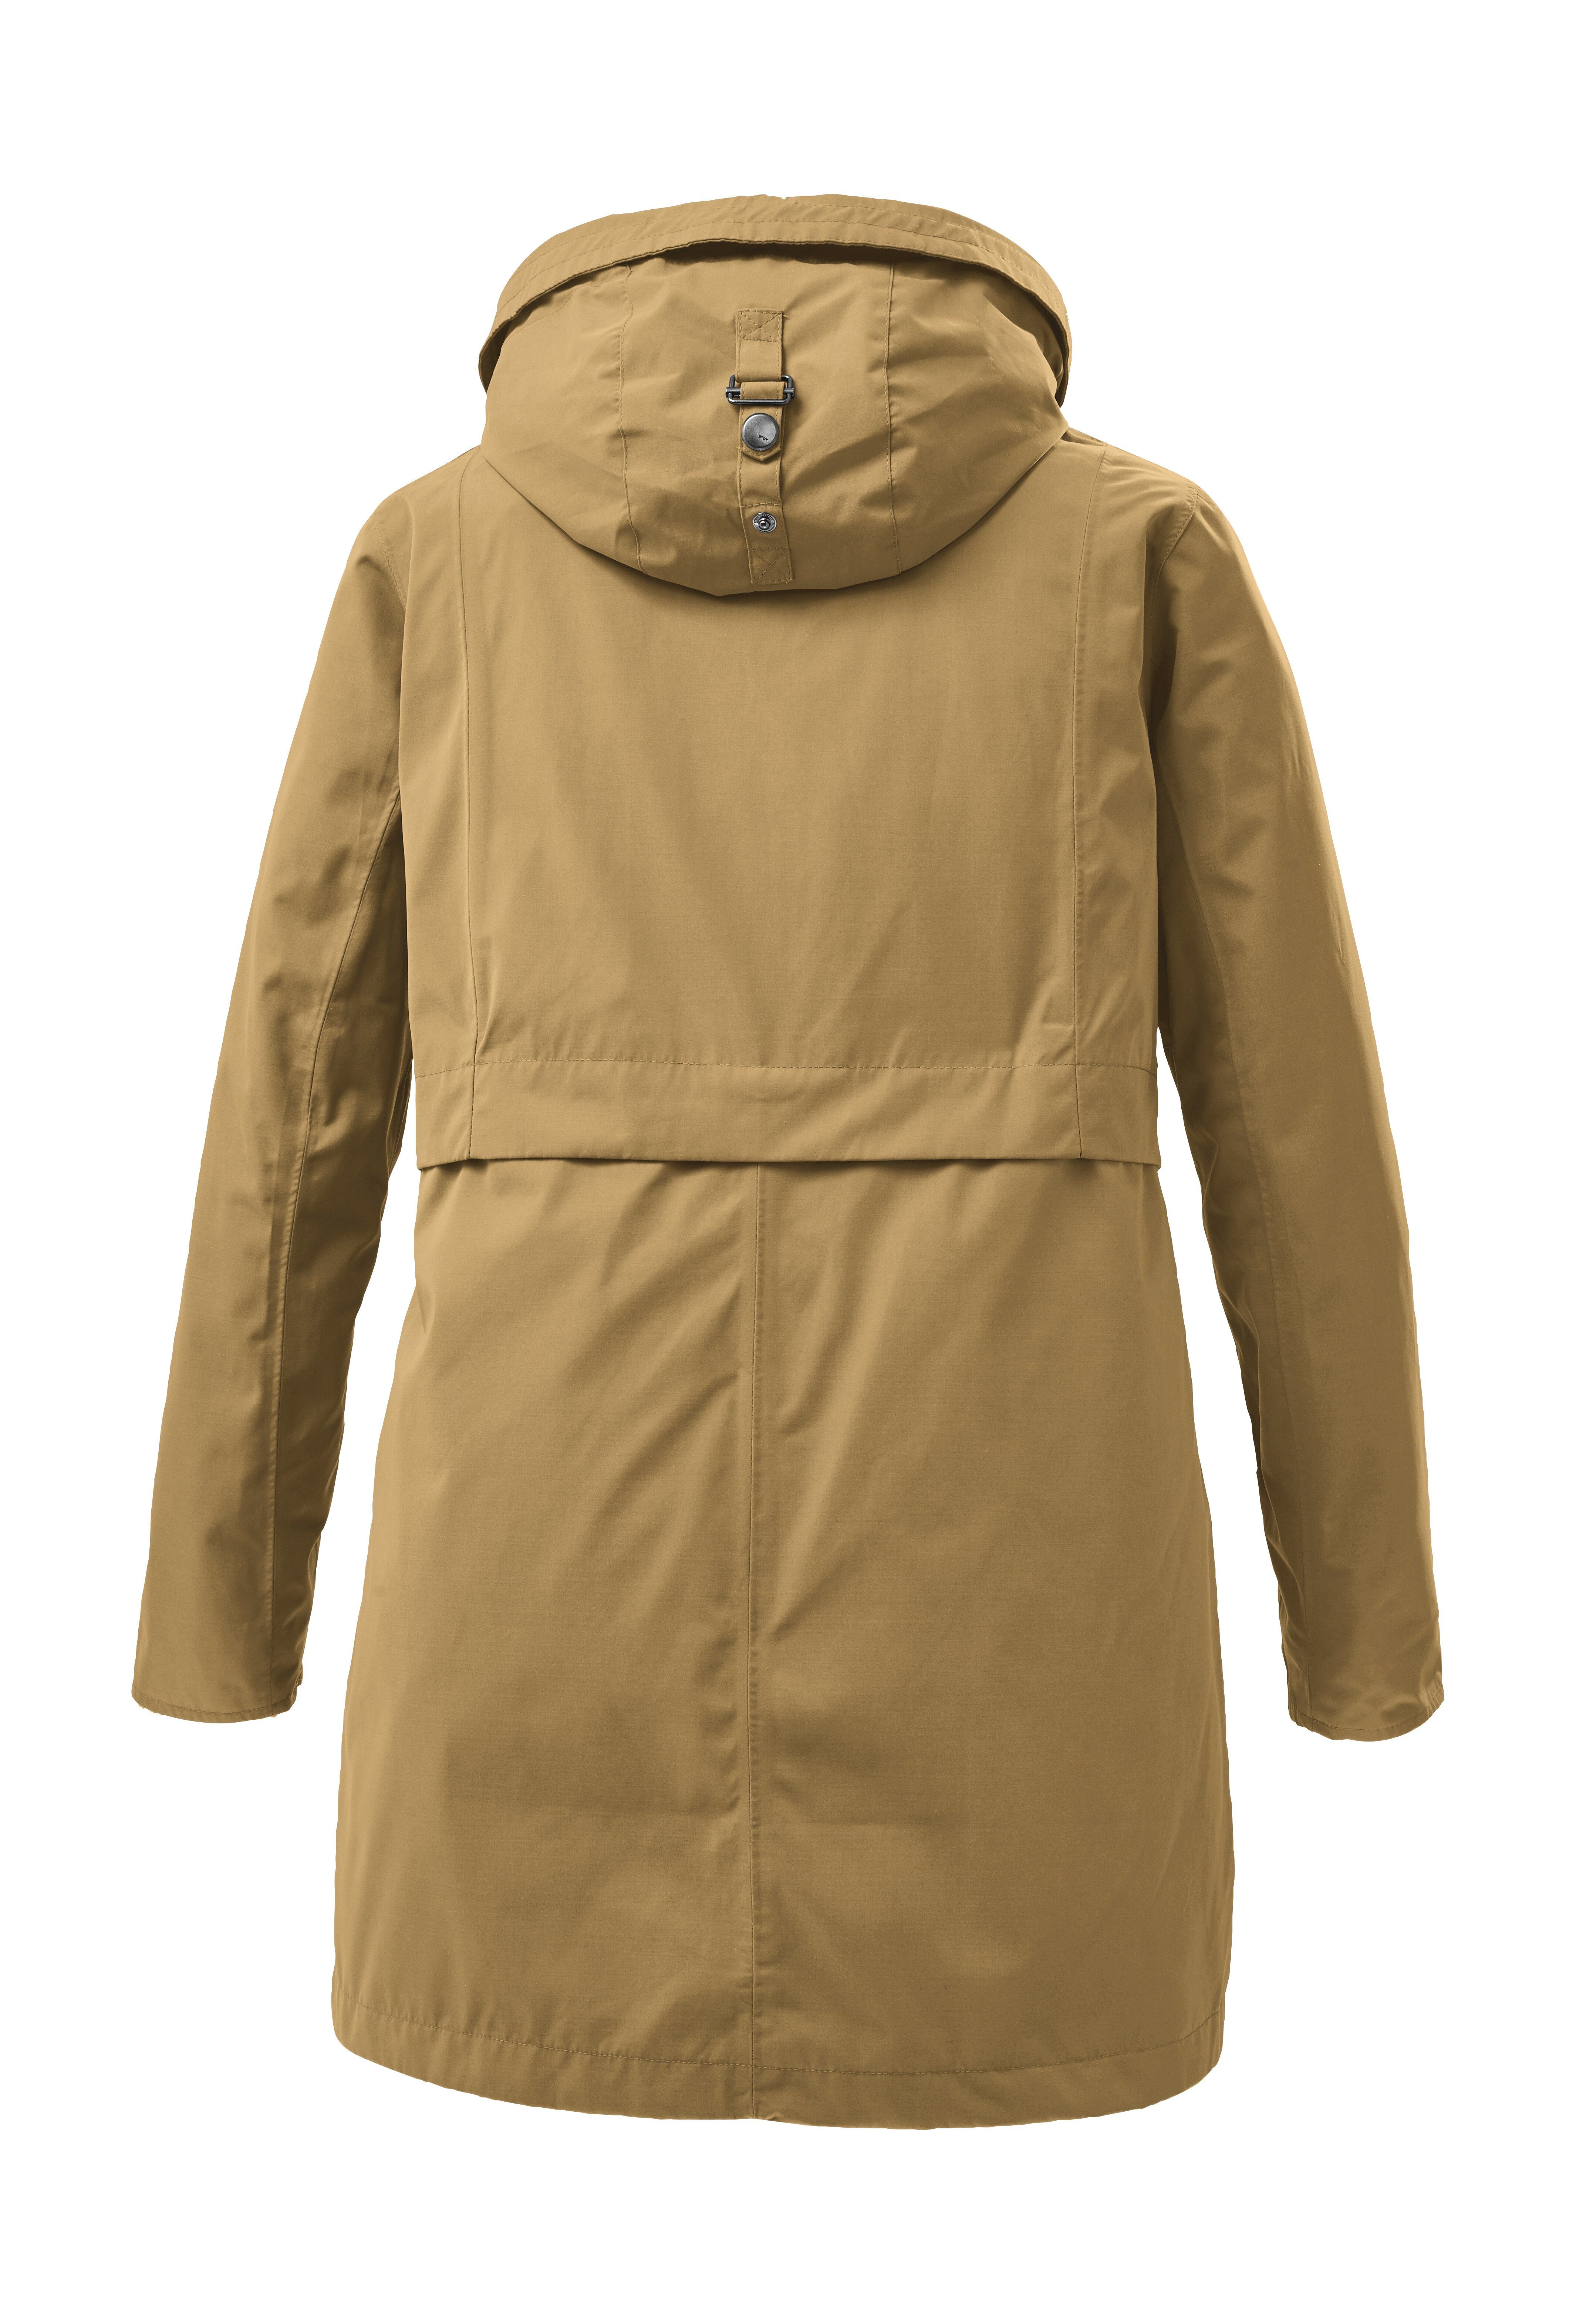 WMN STOY STS PRK Parka 8